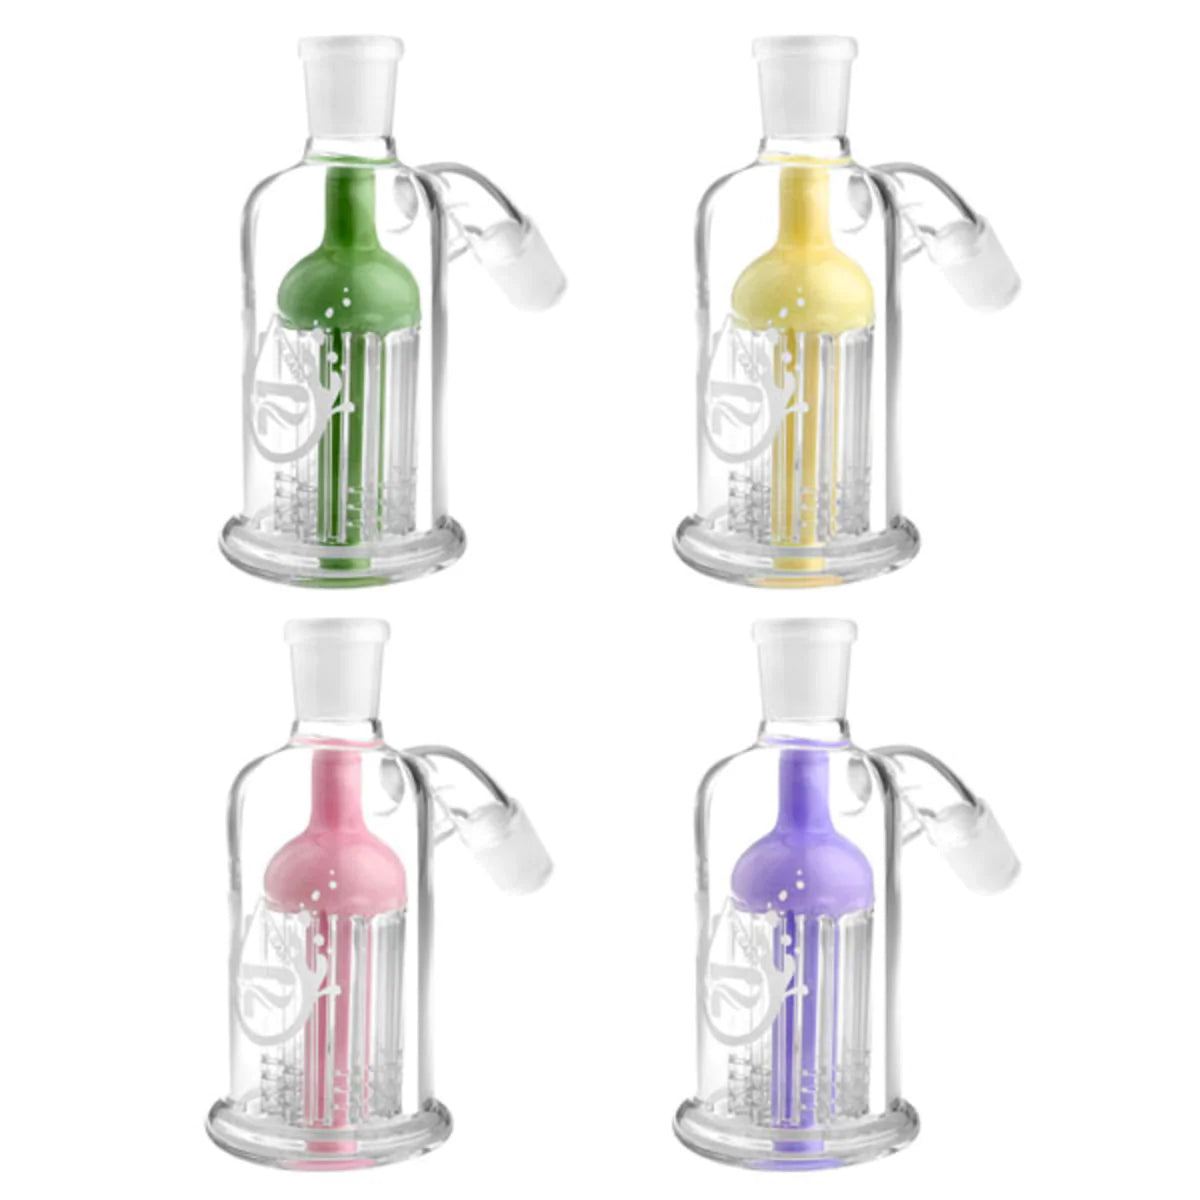 Pulsar 8-Arm Tree Percolator Ash Catcher in Assorted Colors with 45° Joint Angle